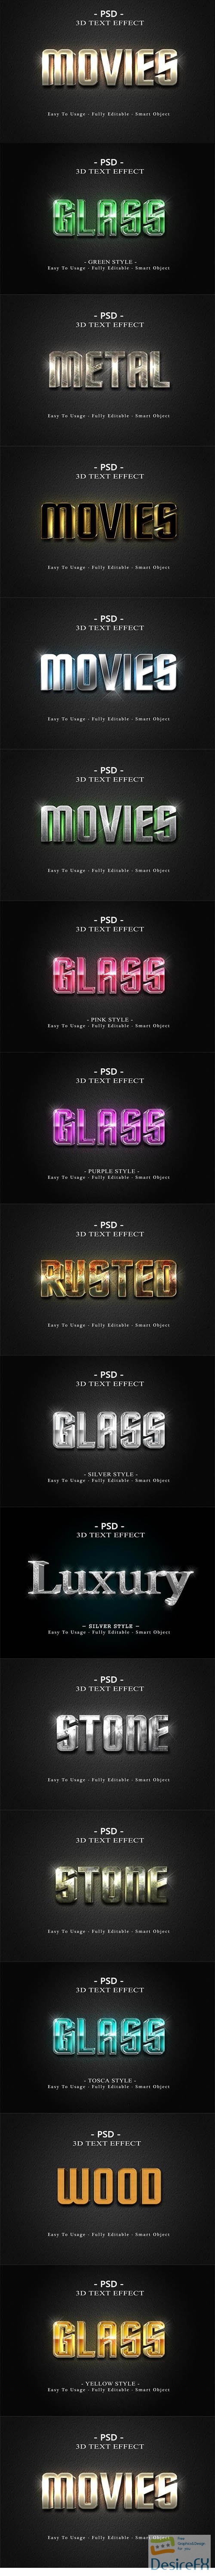 3d text style effect